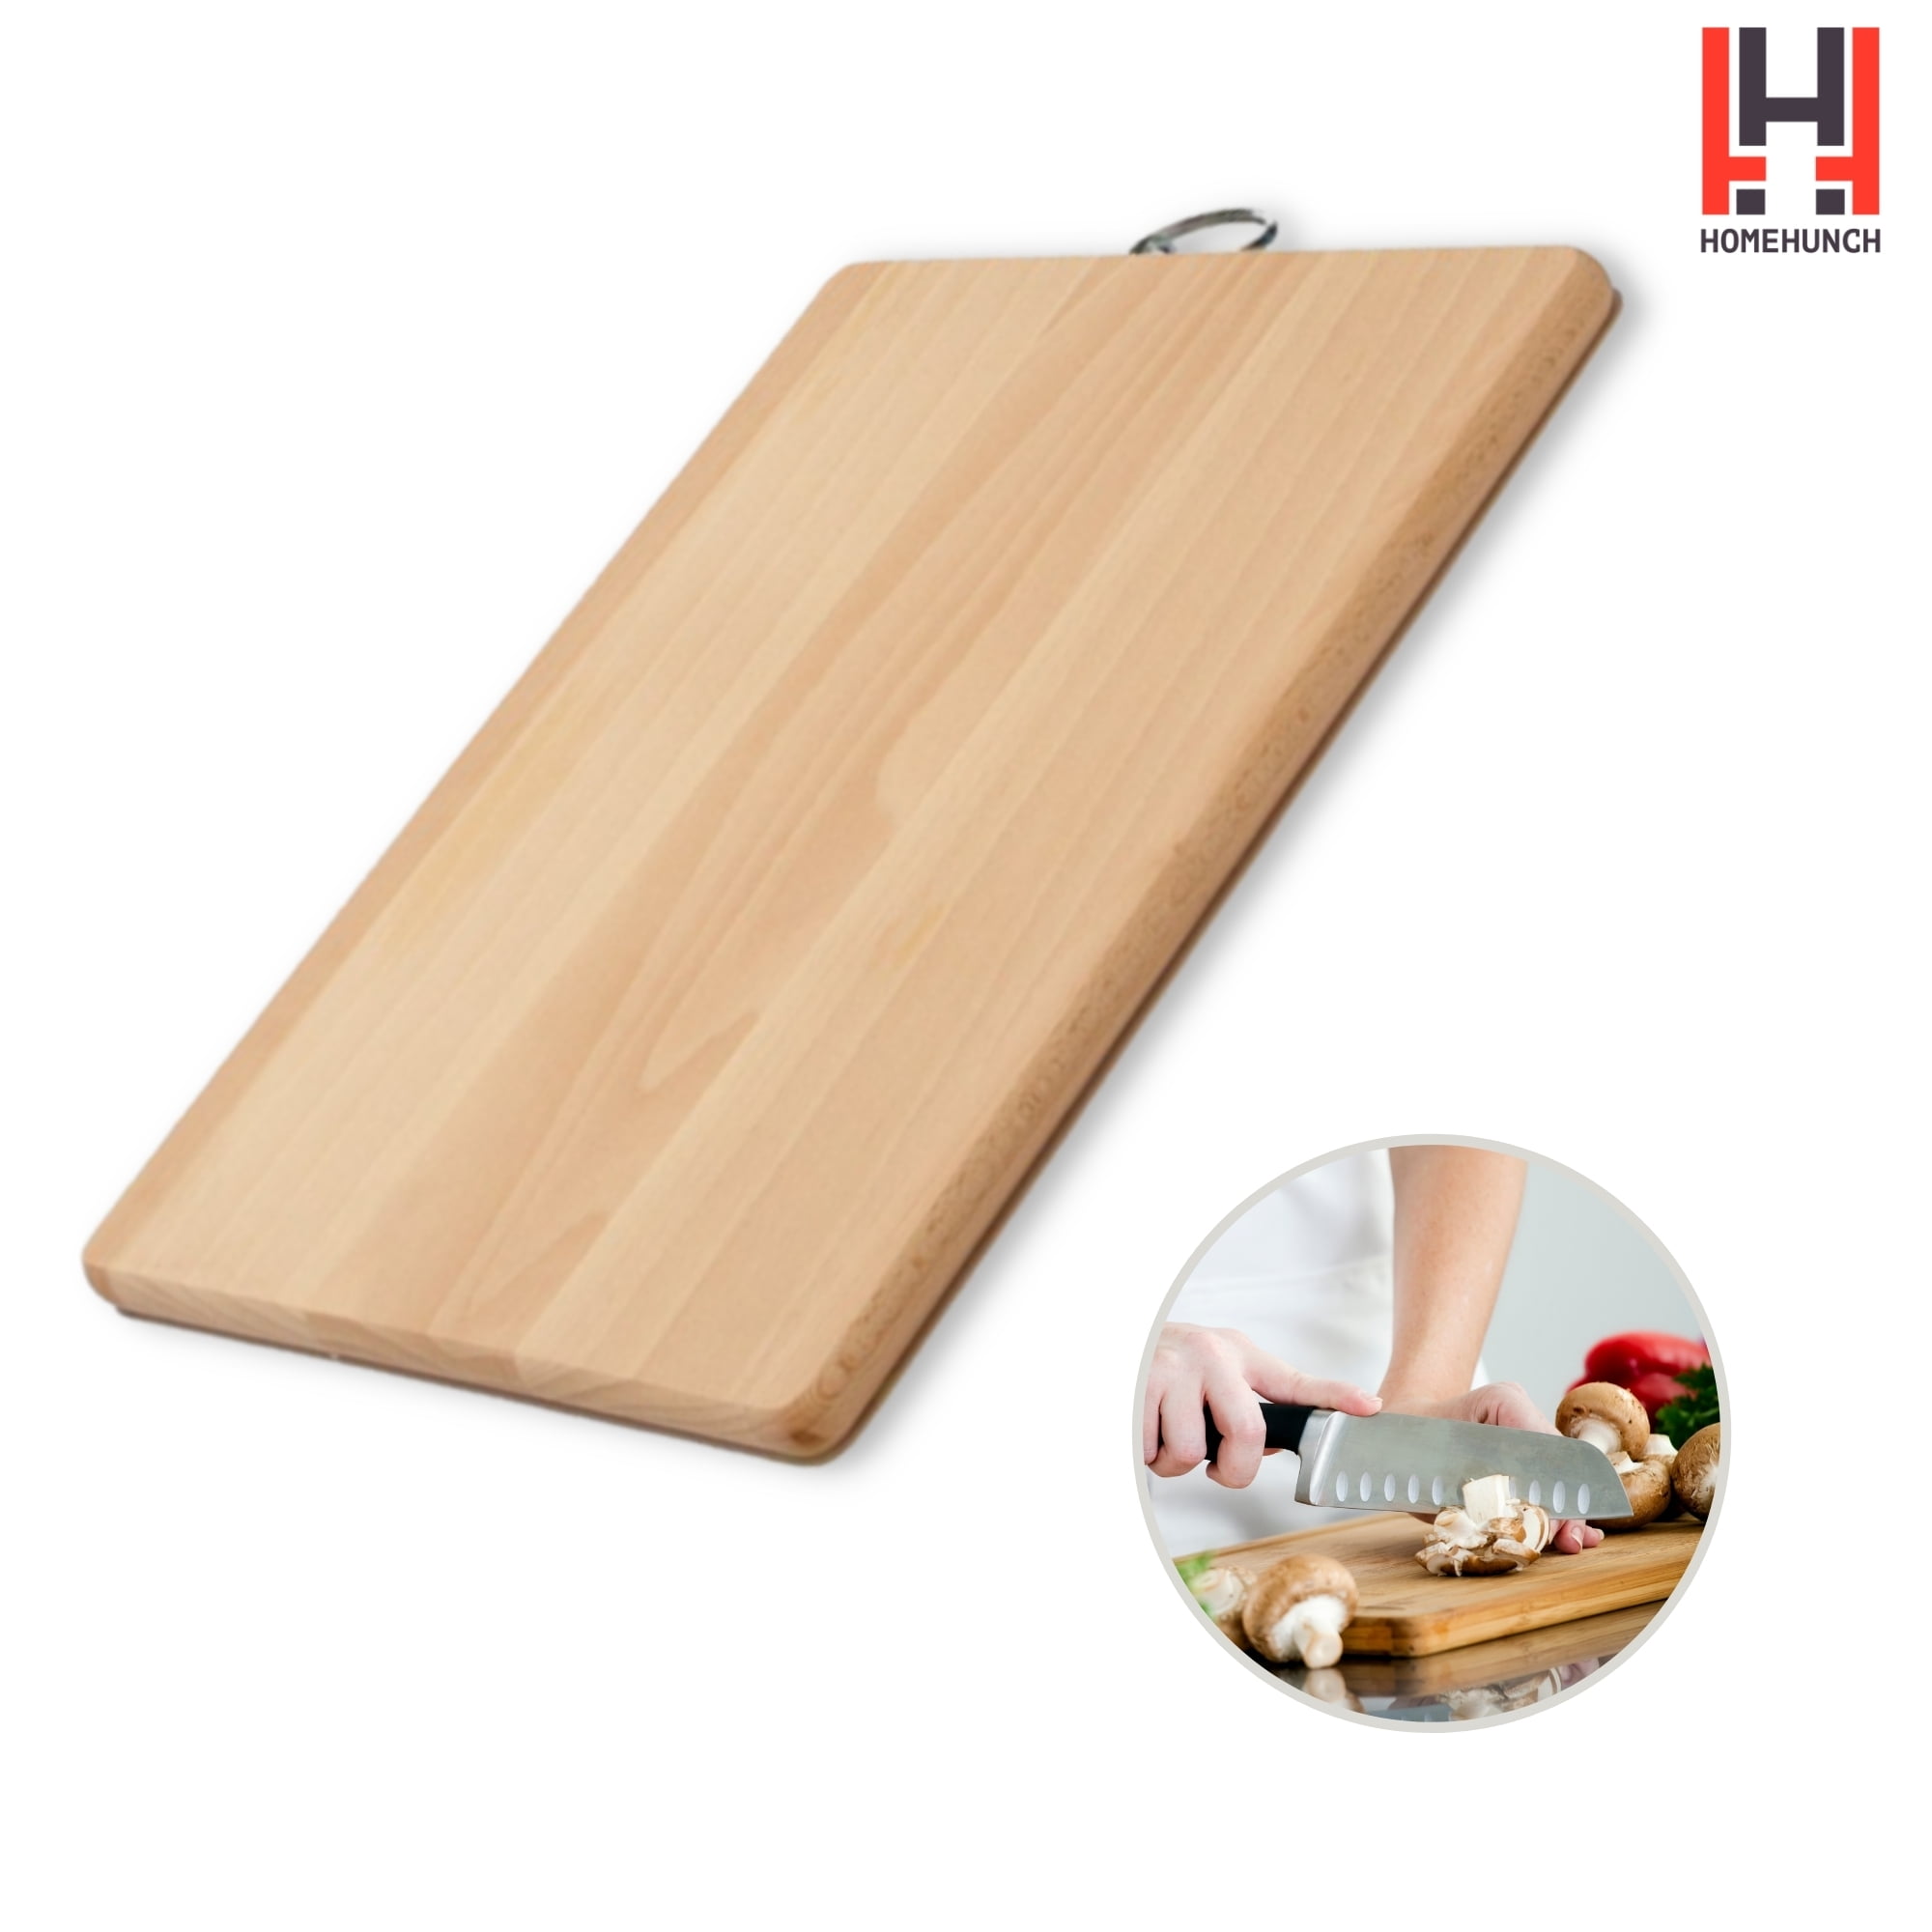 Original Otto Wilde Grillers Oak Cutting Board Made of Oak Wood Lubricated with Handy Juice Groove 12.8 x 10.4 x 1